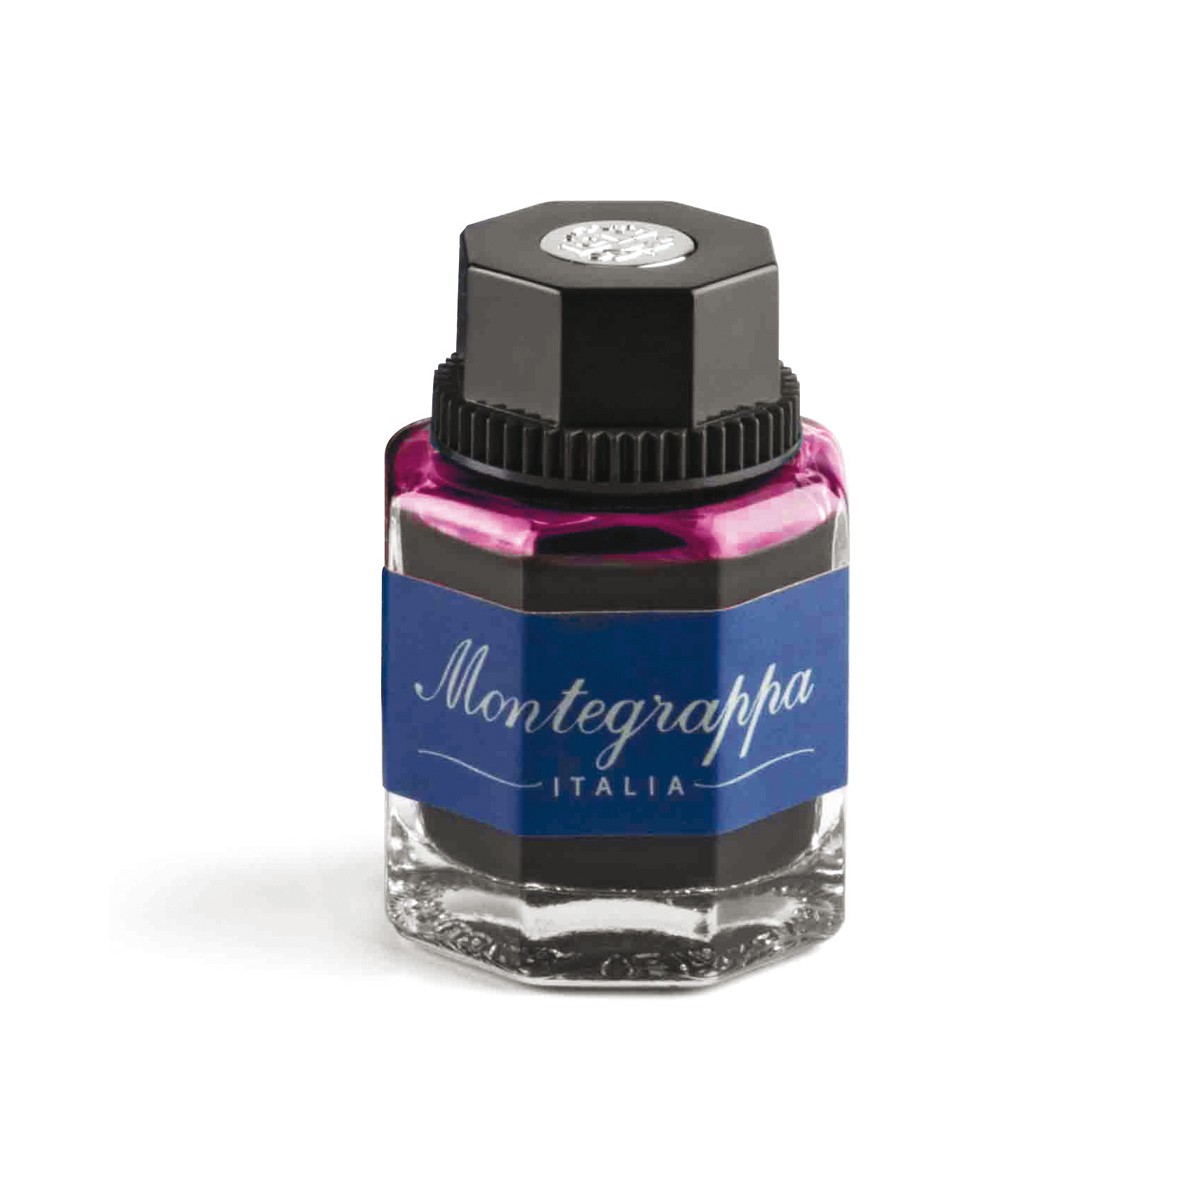 Motegrappa - Ink bottle - Fucsia